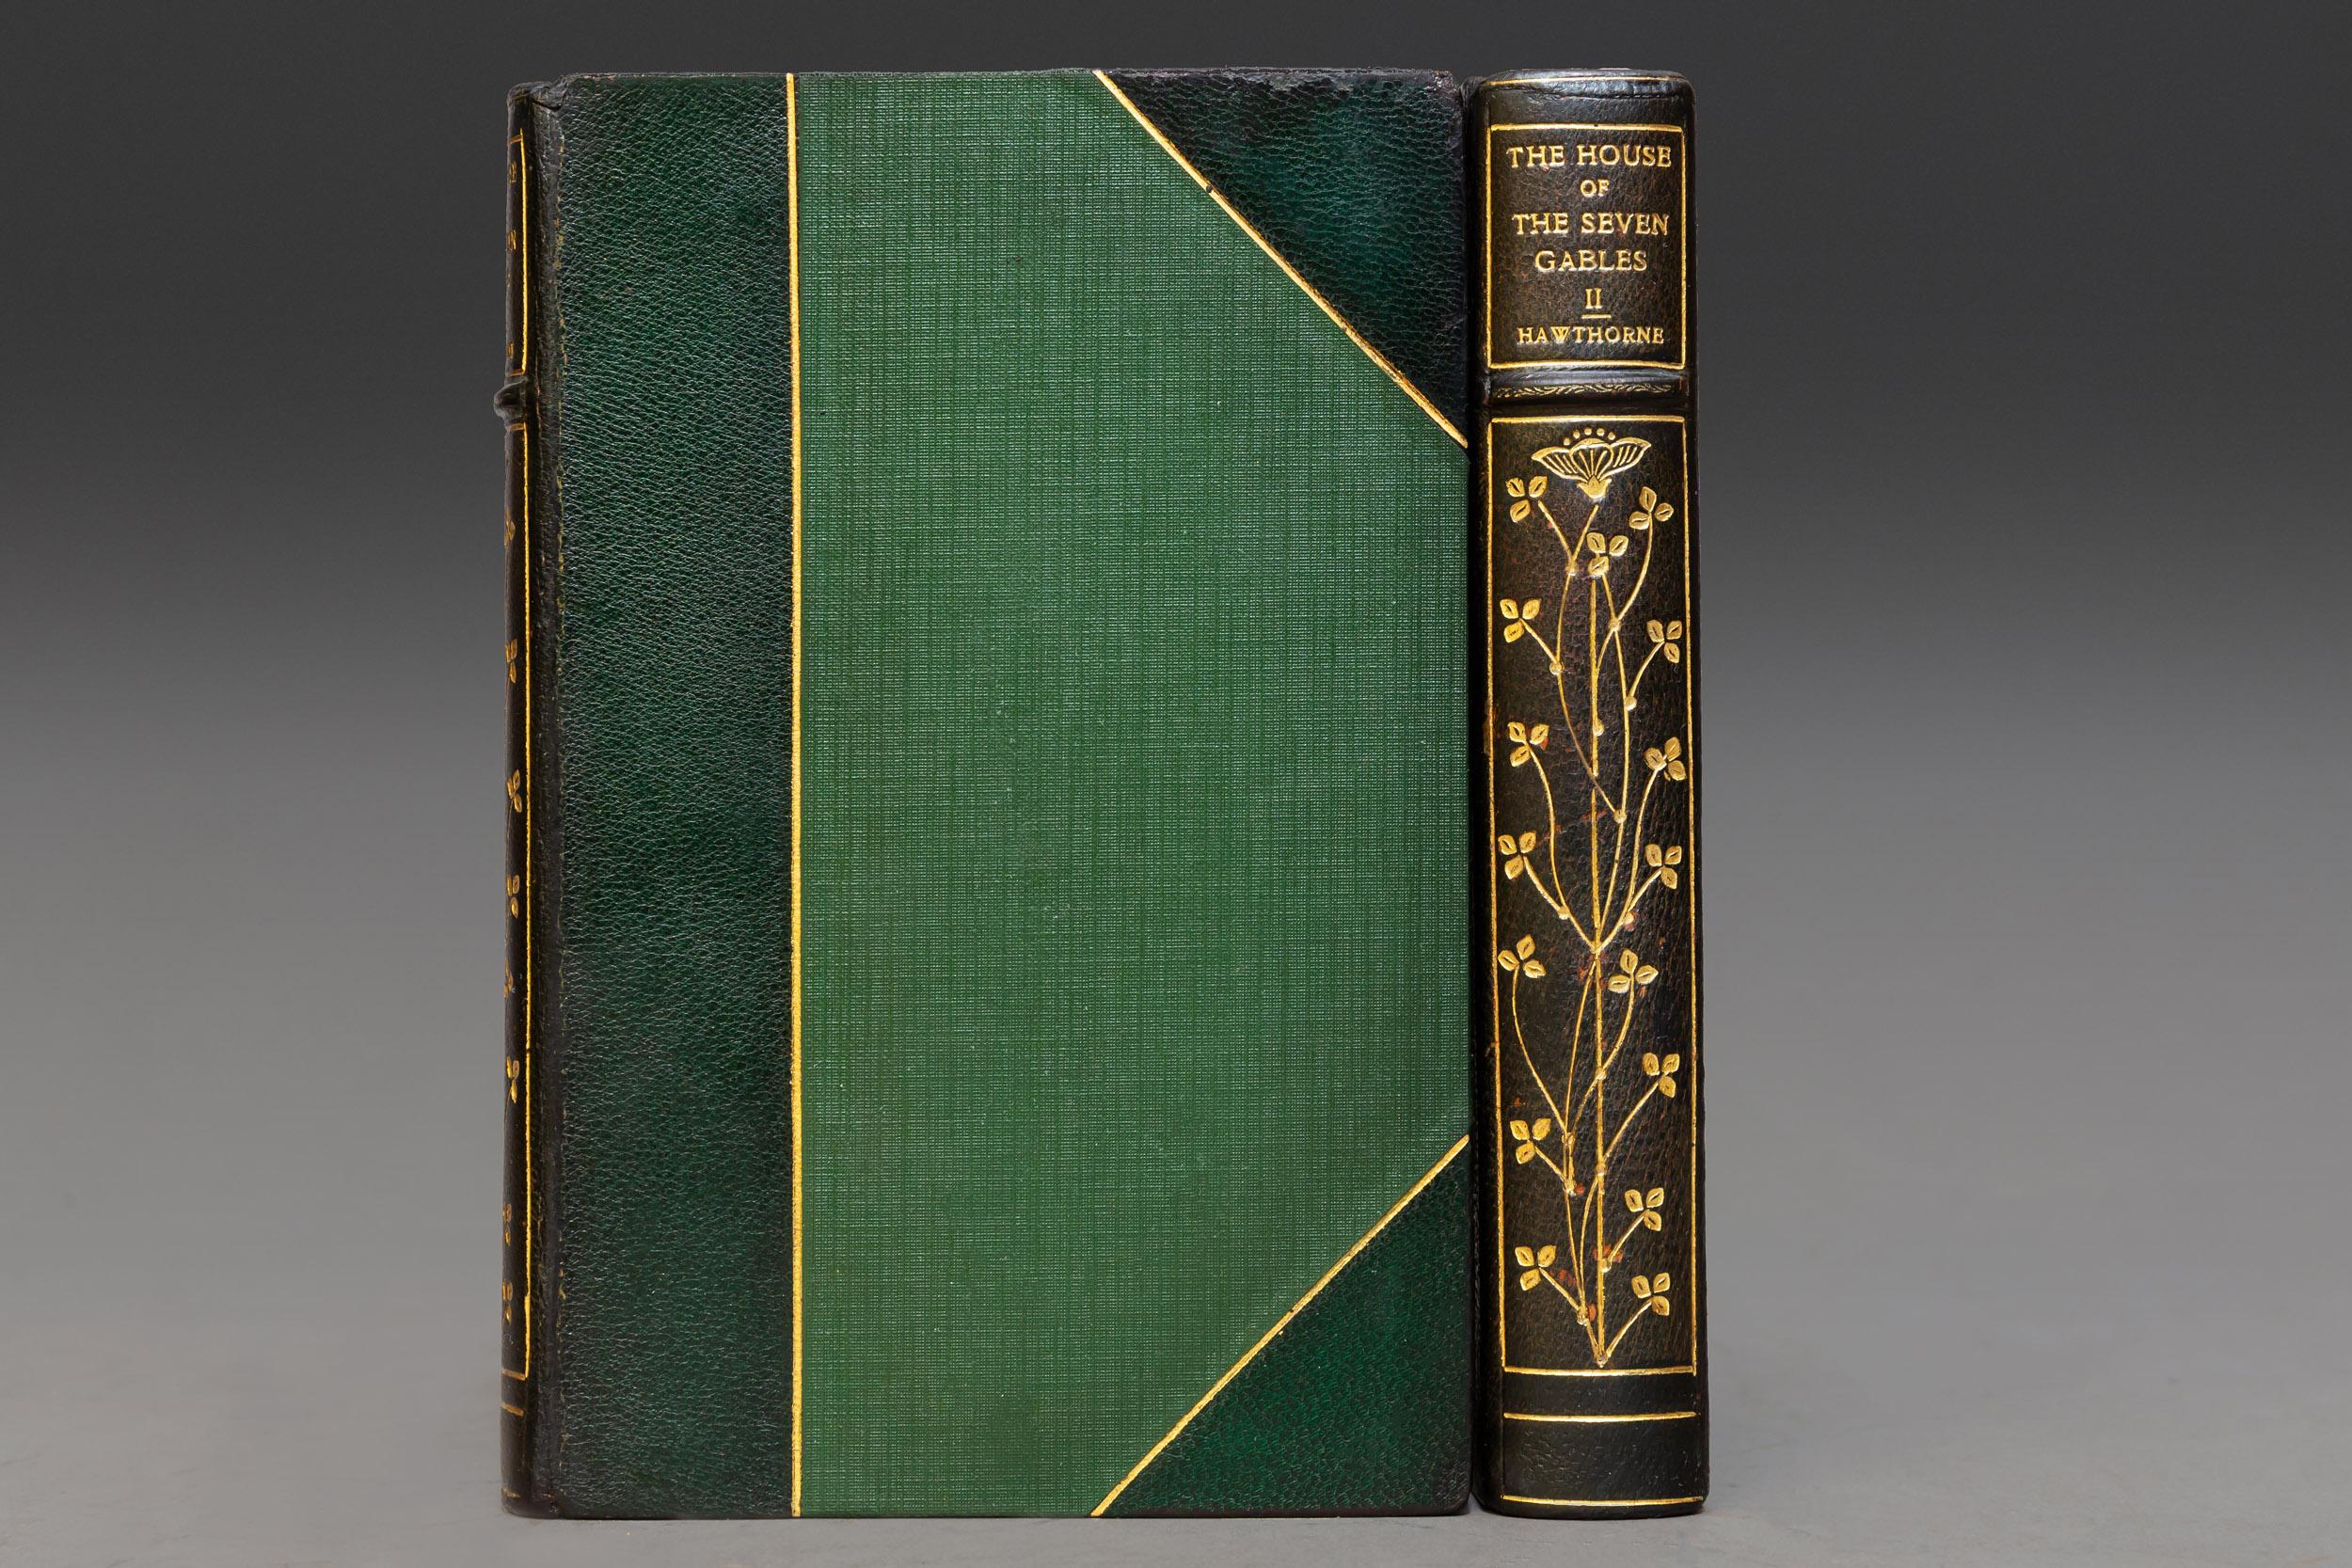 2 Volumes. 

With Illustrations by Maude and G. Cowles. Bound in 3/4 green Morocco, cloth boards, top edges gilt, raised Bands, gilt panels, marbled endpapers. Published: Boston: Houghton Mifflin & Co. 1899 

Measures: H 8”, D 5 1/4”, W 1 1/4”.